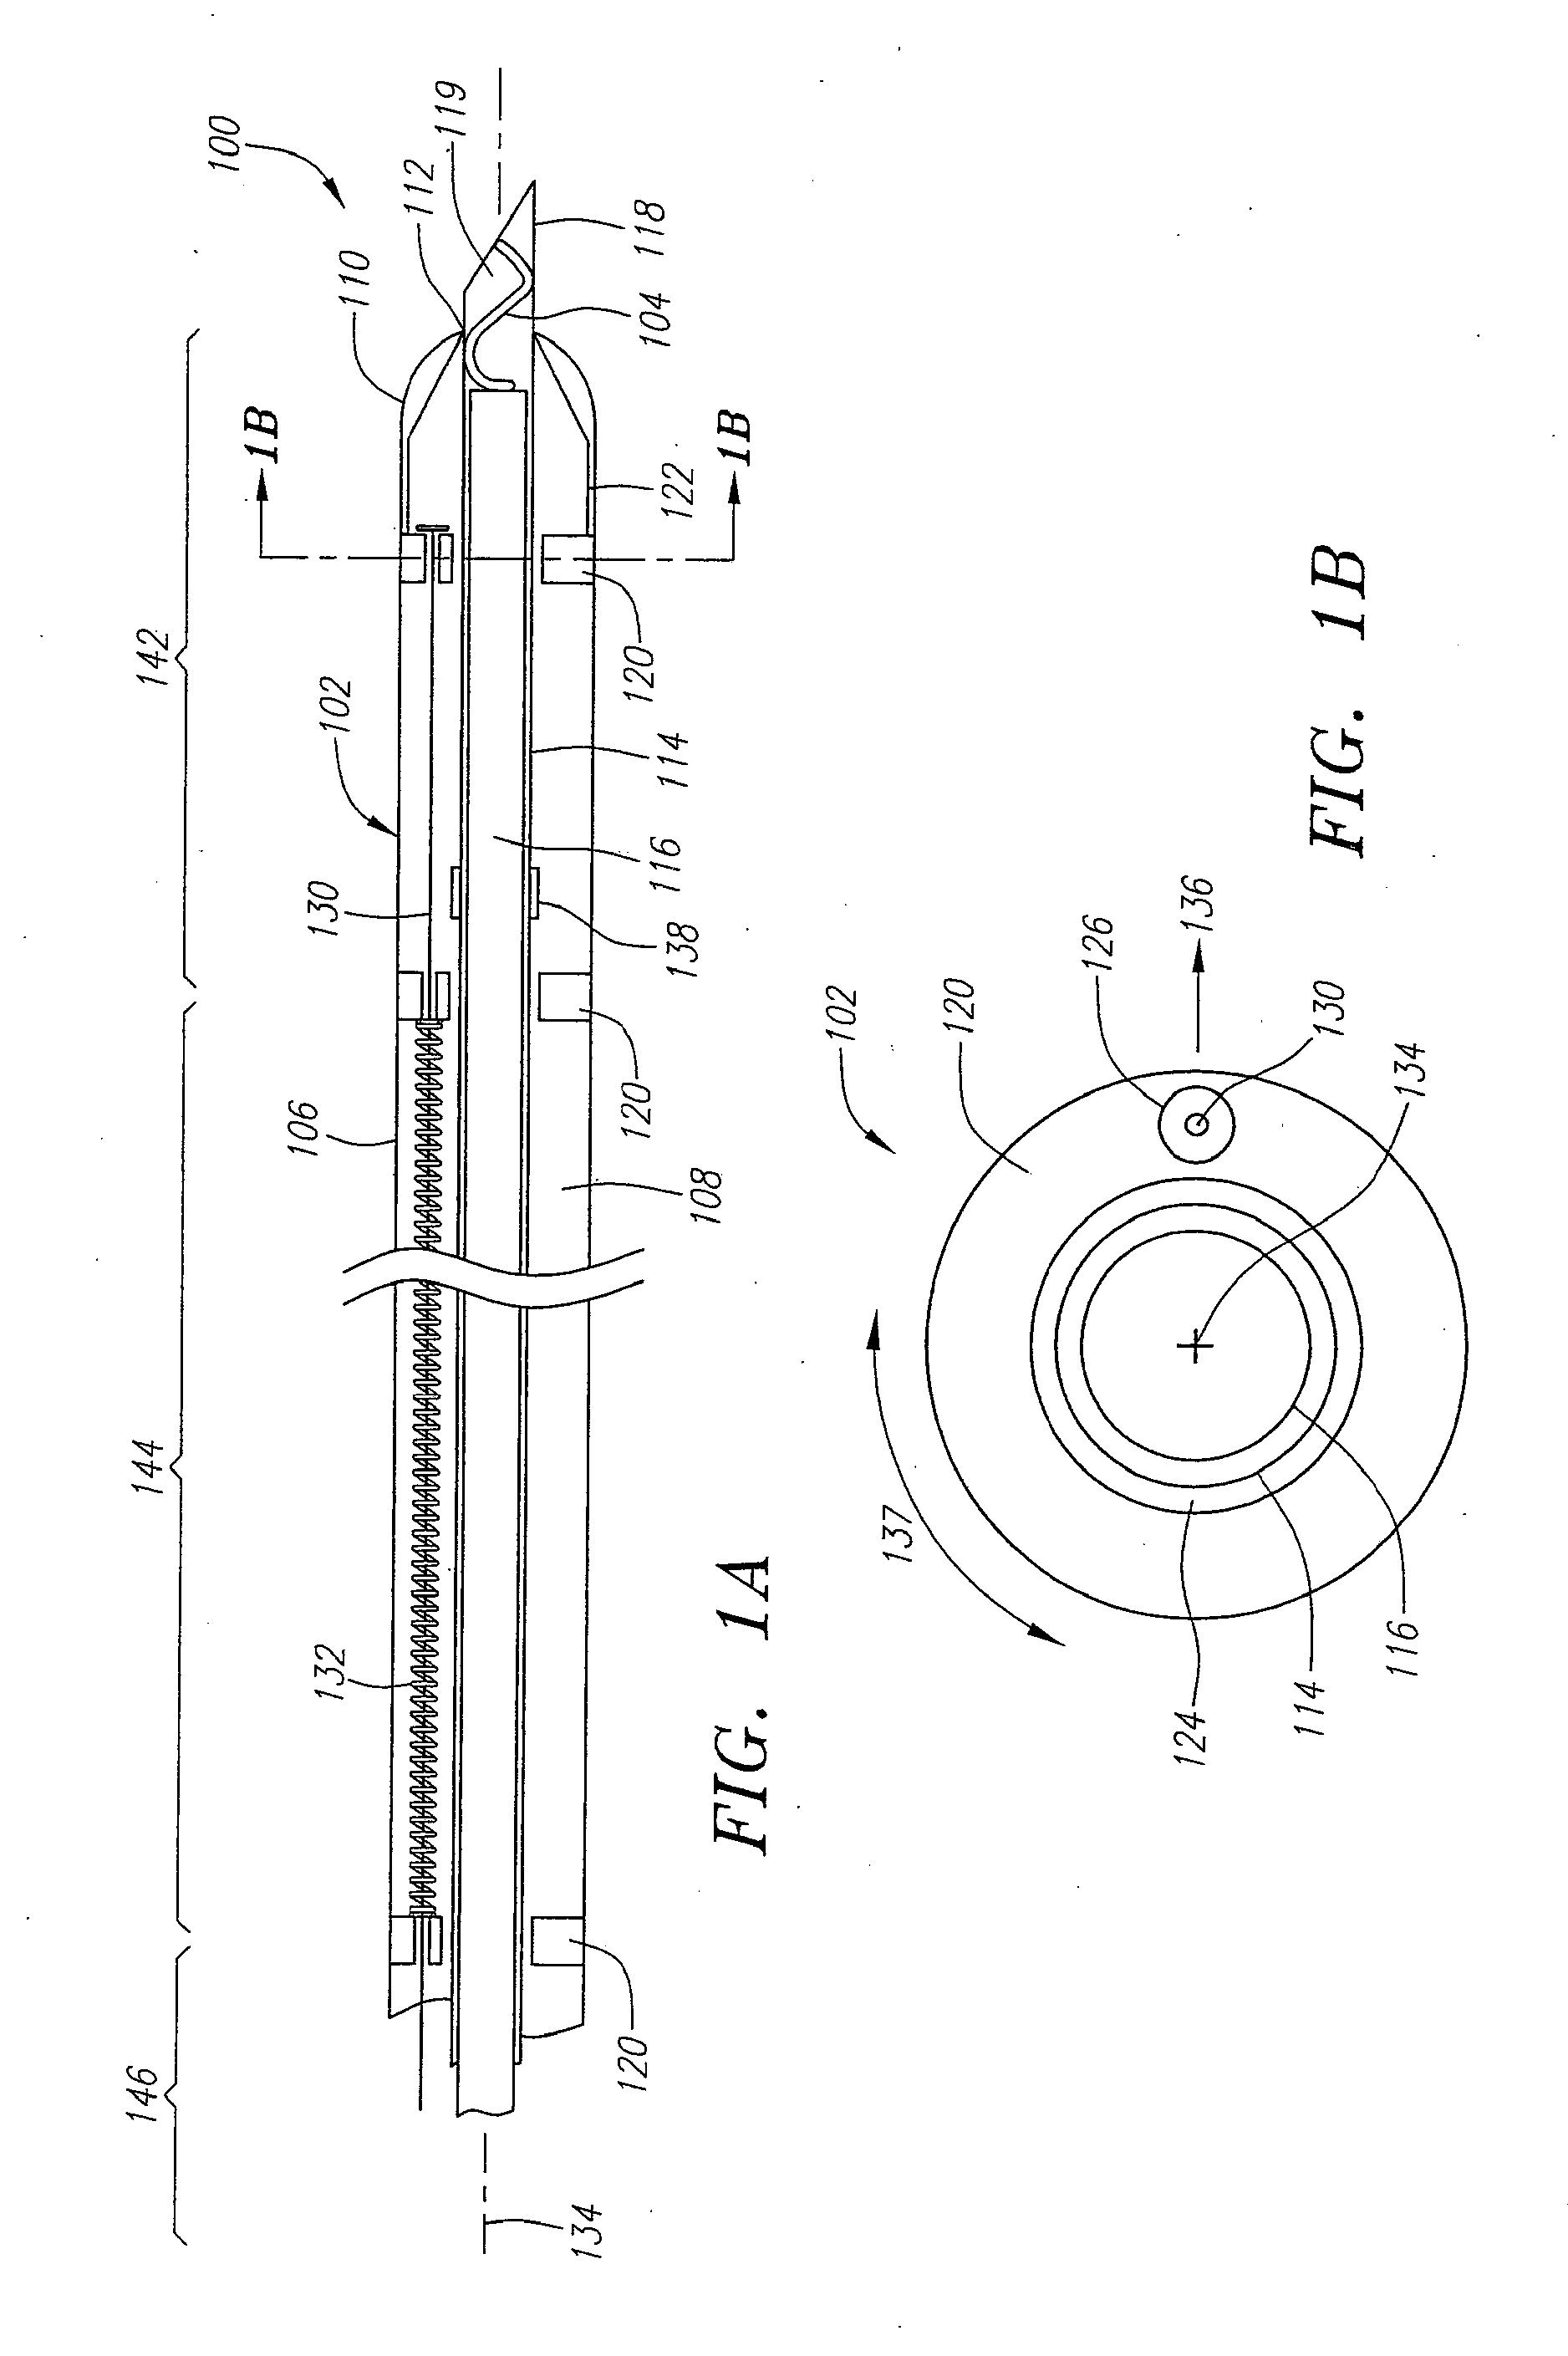 Systems and Methods for Closing Internal Tissue Defects